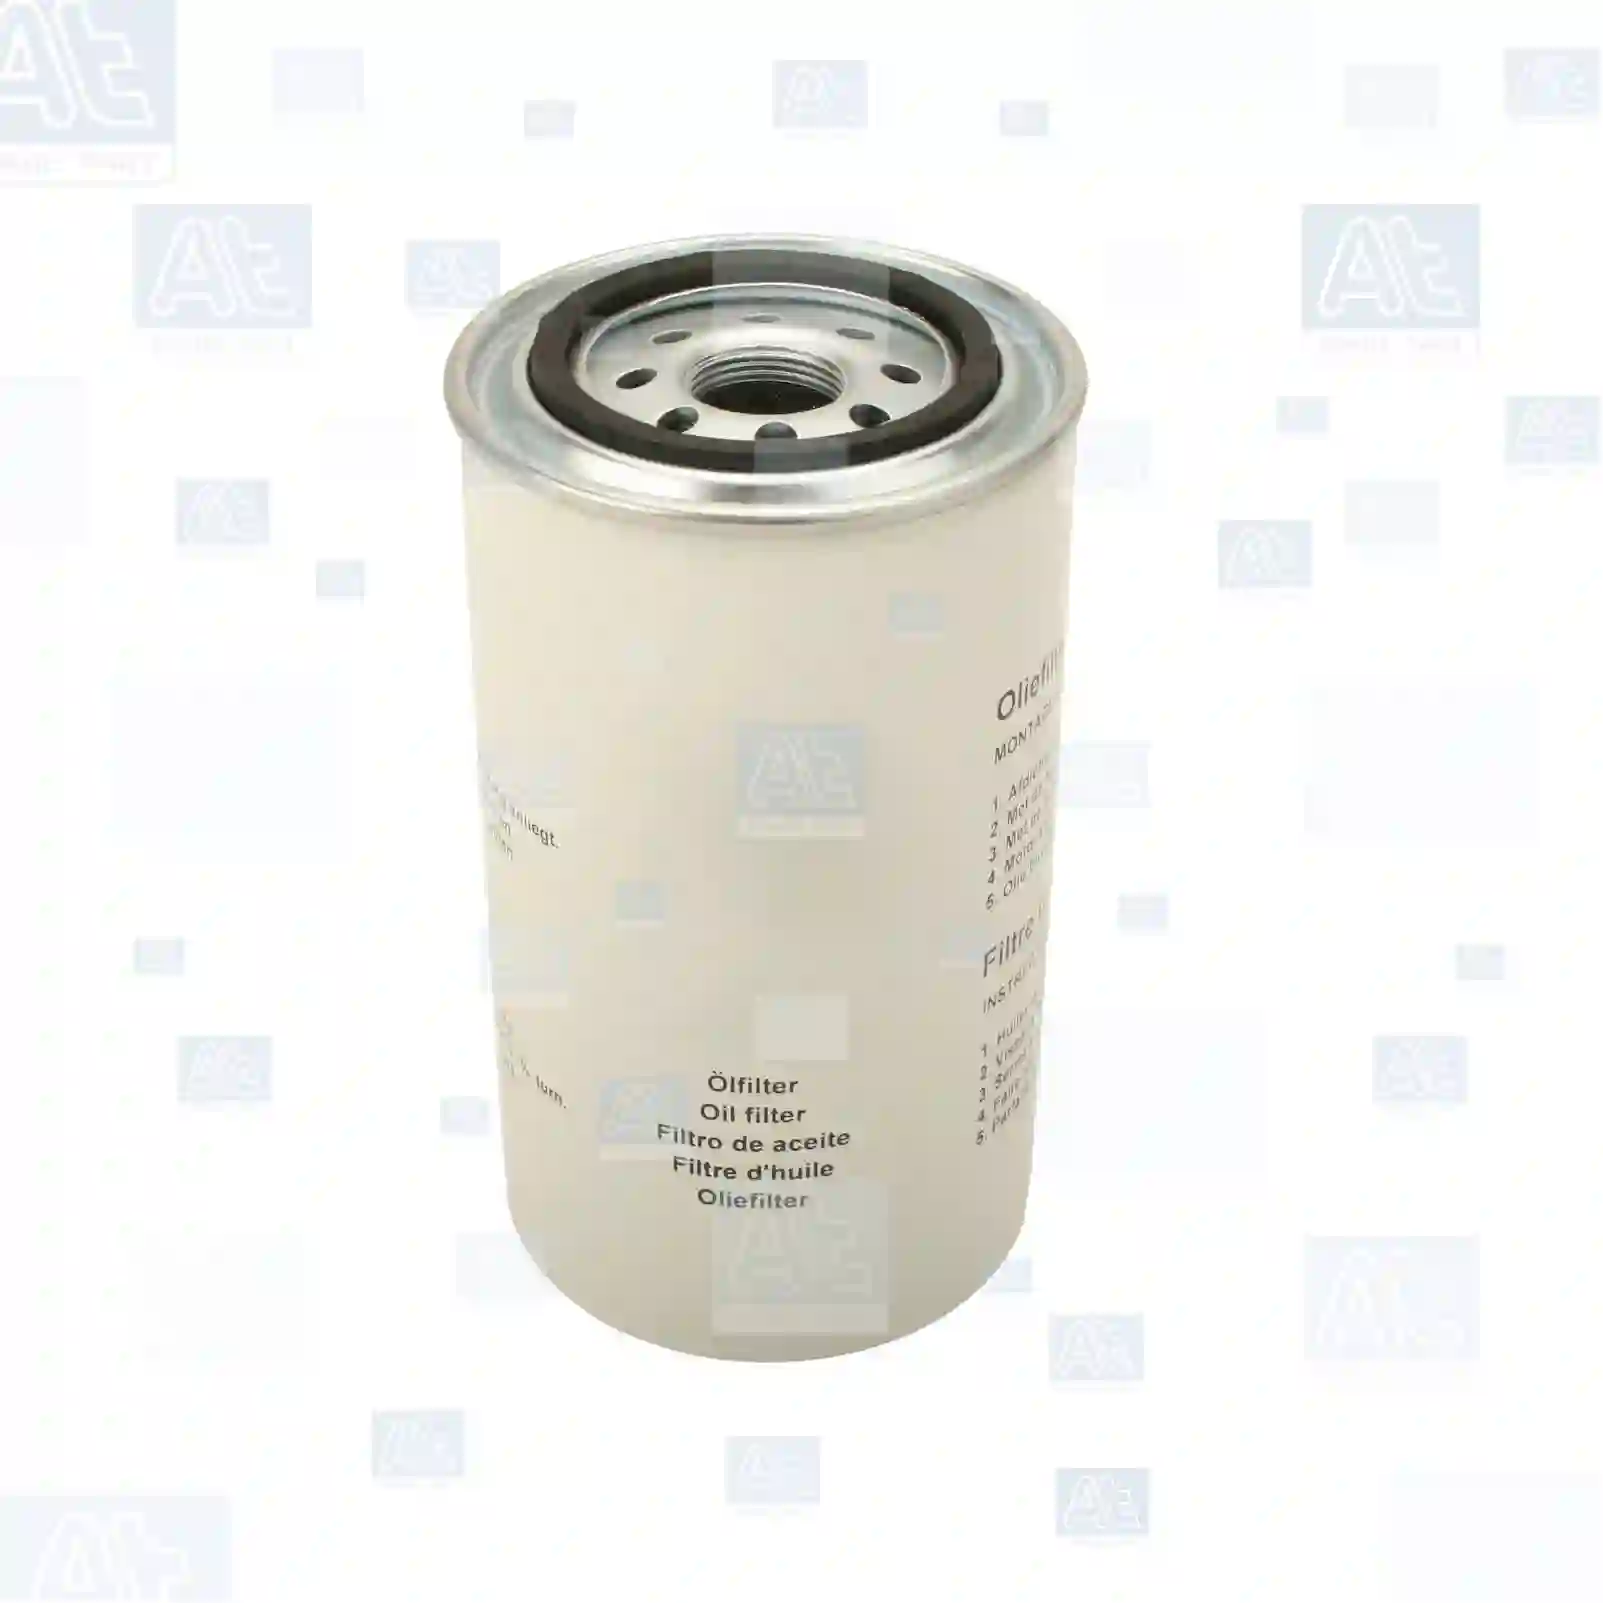 Oil filter, at no 77701055, oem no: 72516556, 1240388H1, 47368538, J903264, J908615, J932217, J934430, J937345, J937743, J937743MP, 3I-1376, 3903269, 4429395, 4429615, 4746914, 4761277, 5011844M, 5016547AA, 5016547AB, 5016547AC, 508325AA, 5083285AA, 5093092AA, 3155618, 3890708, 3890710, 3903264, 3908315, 3908615, 3914395, 3932217, 3934430, 3937695, 3937743, 47100093, 65055105021B, 65055105028A, 991290710, 490196, CBU1124, CBU2676, 3937743, 5016547AA, 5016547AC, 1012N010, 2011078, 151831112, 76192087, Y03753603, DNP558615, 9414101712, 3908615, 1240388H1, J903264, J908615, J932217, 02/910970, 0531012005, 3908615, CBU1124, 2191P558615, 1072417M1, J934430, 0J937743, 47368538, 1870014, J908615, LUS8615, 278618139902, 3908615, 0704970123, 81035900, 15155622, 36844, 85114086, 991208615, 991290710 At Spare Part | Engine, Accelerator Pedal, Camshaft, Connecting Rod, Crankcase, Crankshaft, Cylinder Head, Engine Suspension Mountings, Exhaust Manifold, Exhaust Gas Recirculation, Filter Kits, Flywheel Housing, General Overhaul Kits, Engine, Intake Manifold, Oil Cleaner, Oil Cooler, Oil Filter, Oil Pump, Oil Sump, Piston & Liner, Sensor & Switch, Timing Case, Turbocharger, Cooling System, Belt Tensioner, Coolant Filter, Coolant Pipe, Corrosion Prevention Agent, Drive, Expansion Tank, Fan, Intercooler, Monitors & Gauges, Radiator, Thermostat, V-Belt / Timing belt, Water Pump, Fuel System, Electronical Injector Unit, Feed Pump, Fuel Filter, cpl., Fuel Gauge Sender,  Fuel Line, Fuel Pump, Fuel Tank, Injection Line Kit, Injection Pump, Exhaust System, Clutch & Pedal, Gearbox, Propeller Shaft, Axles, Brake System, Hubs & Wheels, Suspension, Leaf Spring, Universal Parts / Accessories, Steering, Electrical System, Cabin Oil filter, at no 77701055, oem no: 72516556, 1240388H1, 47368538, J903264, J908615, J932217, J934430, J937345, J937743, J937743MP, 3I-1376, 3903269, 4429395, 4429615, 4746914, 4761277, 5011844M, 5016547AA, 5016547AB, 5016547AC, 508325AA, 5083285AA, 5093092AA, 3155618, 3890708, 3890710, 3903264, 3908315, 3908615, 3914395, 3932217, 3934430, 3937695, 3937743, 47100093, 65055105021B, 65055105028A, 991290710, 490196, CBU1124, CBU2676, 3937743, 5016547AA, 5016547AC, 1012N010, 2011078, 151831112, 76192087, Y03753603, DNP558615, 9414101712, 3908615, 1240388H1, J903264, J908615, J932217, 02/910970, 0531012005, 3908615, CBU1124, 2191P558615, 1072417M1, J934430, 0J937743, 47368538, 1870014, J908615, LUS8615, 278618139902, 3908615, 0704970123, 81035900, 15155622, 36844, 85114086, 991208615, 991290710 At Spare Part | Engine, Accelerator Pedal, Camshaft, Connecting Rod, Crankcase, Crankshaft, Cylinder Head, Engine Suspension Mountings, Exhaust Manifold, Exhaust Gas Recirculation, Filter Kits, Flywheel Housing, General Overhaul Kits, Engine, Intake Manifold, Oil Cleaner, Oil Cooler, Oil Filter, Oil Pump, Oil Sump, Piston & Liner, Sensor & Switch, Timing Case, Turbocharger, Cooling System, Belt Tensioner, Coolant Filter, Coolant Pipe, Corrosion Prevention Agent, Drive, Expansion Tank, Fan, Intercooler, Monitors & Gauges, Radiator, Thermostat, V-Belt / Timing belt, Water Pump, Fuel System, Electronical Injector Unit, Feed Pump, Fuel Filter, cpl., Fuel Gauge Sender,  Fuel Line, Fuel Pump, Fuel Tank, Injection Line Kit, Injection Pump, Exhaust System, Clutch & Pedal, Gearbox, Propeller Shaft, Axles, Brake System, Hubs & Wheels, Suspension, Leaf Spring, Universal Parts / Accessories, Steering, Electrical System, Cabin